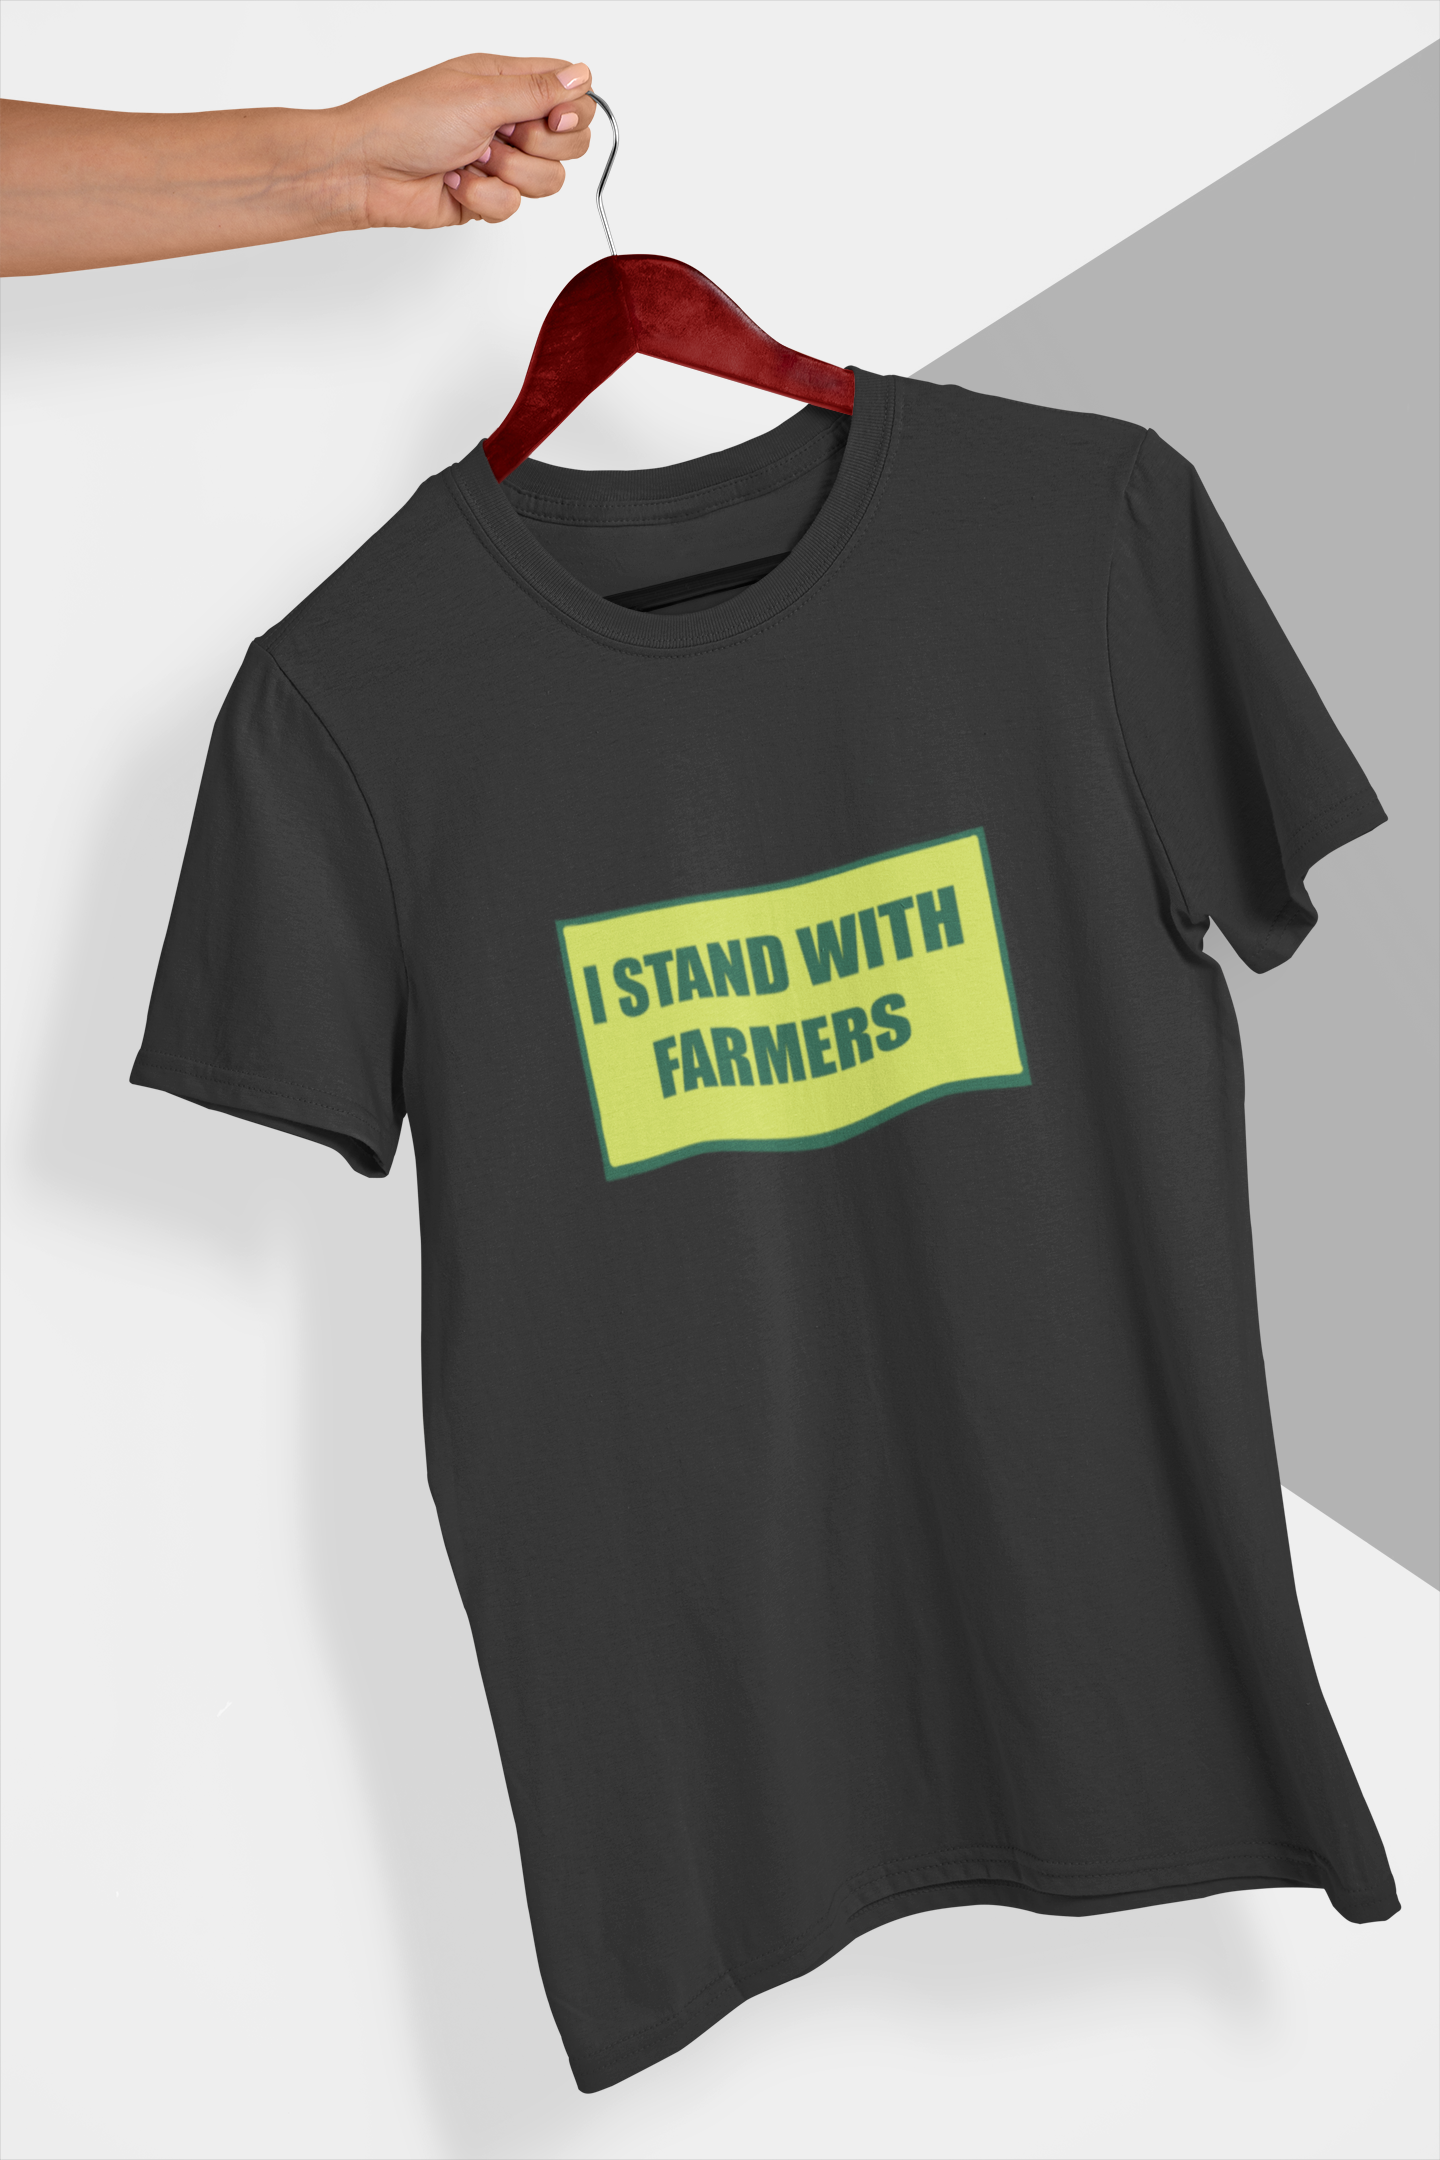 I STAND WITH FARMERS T-shirt